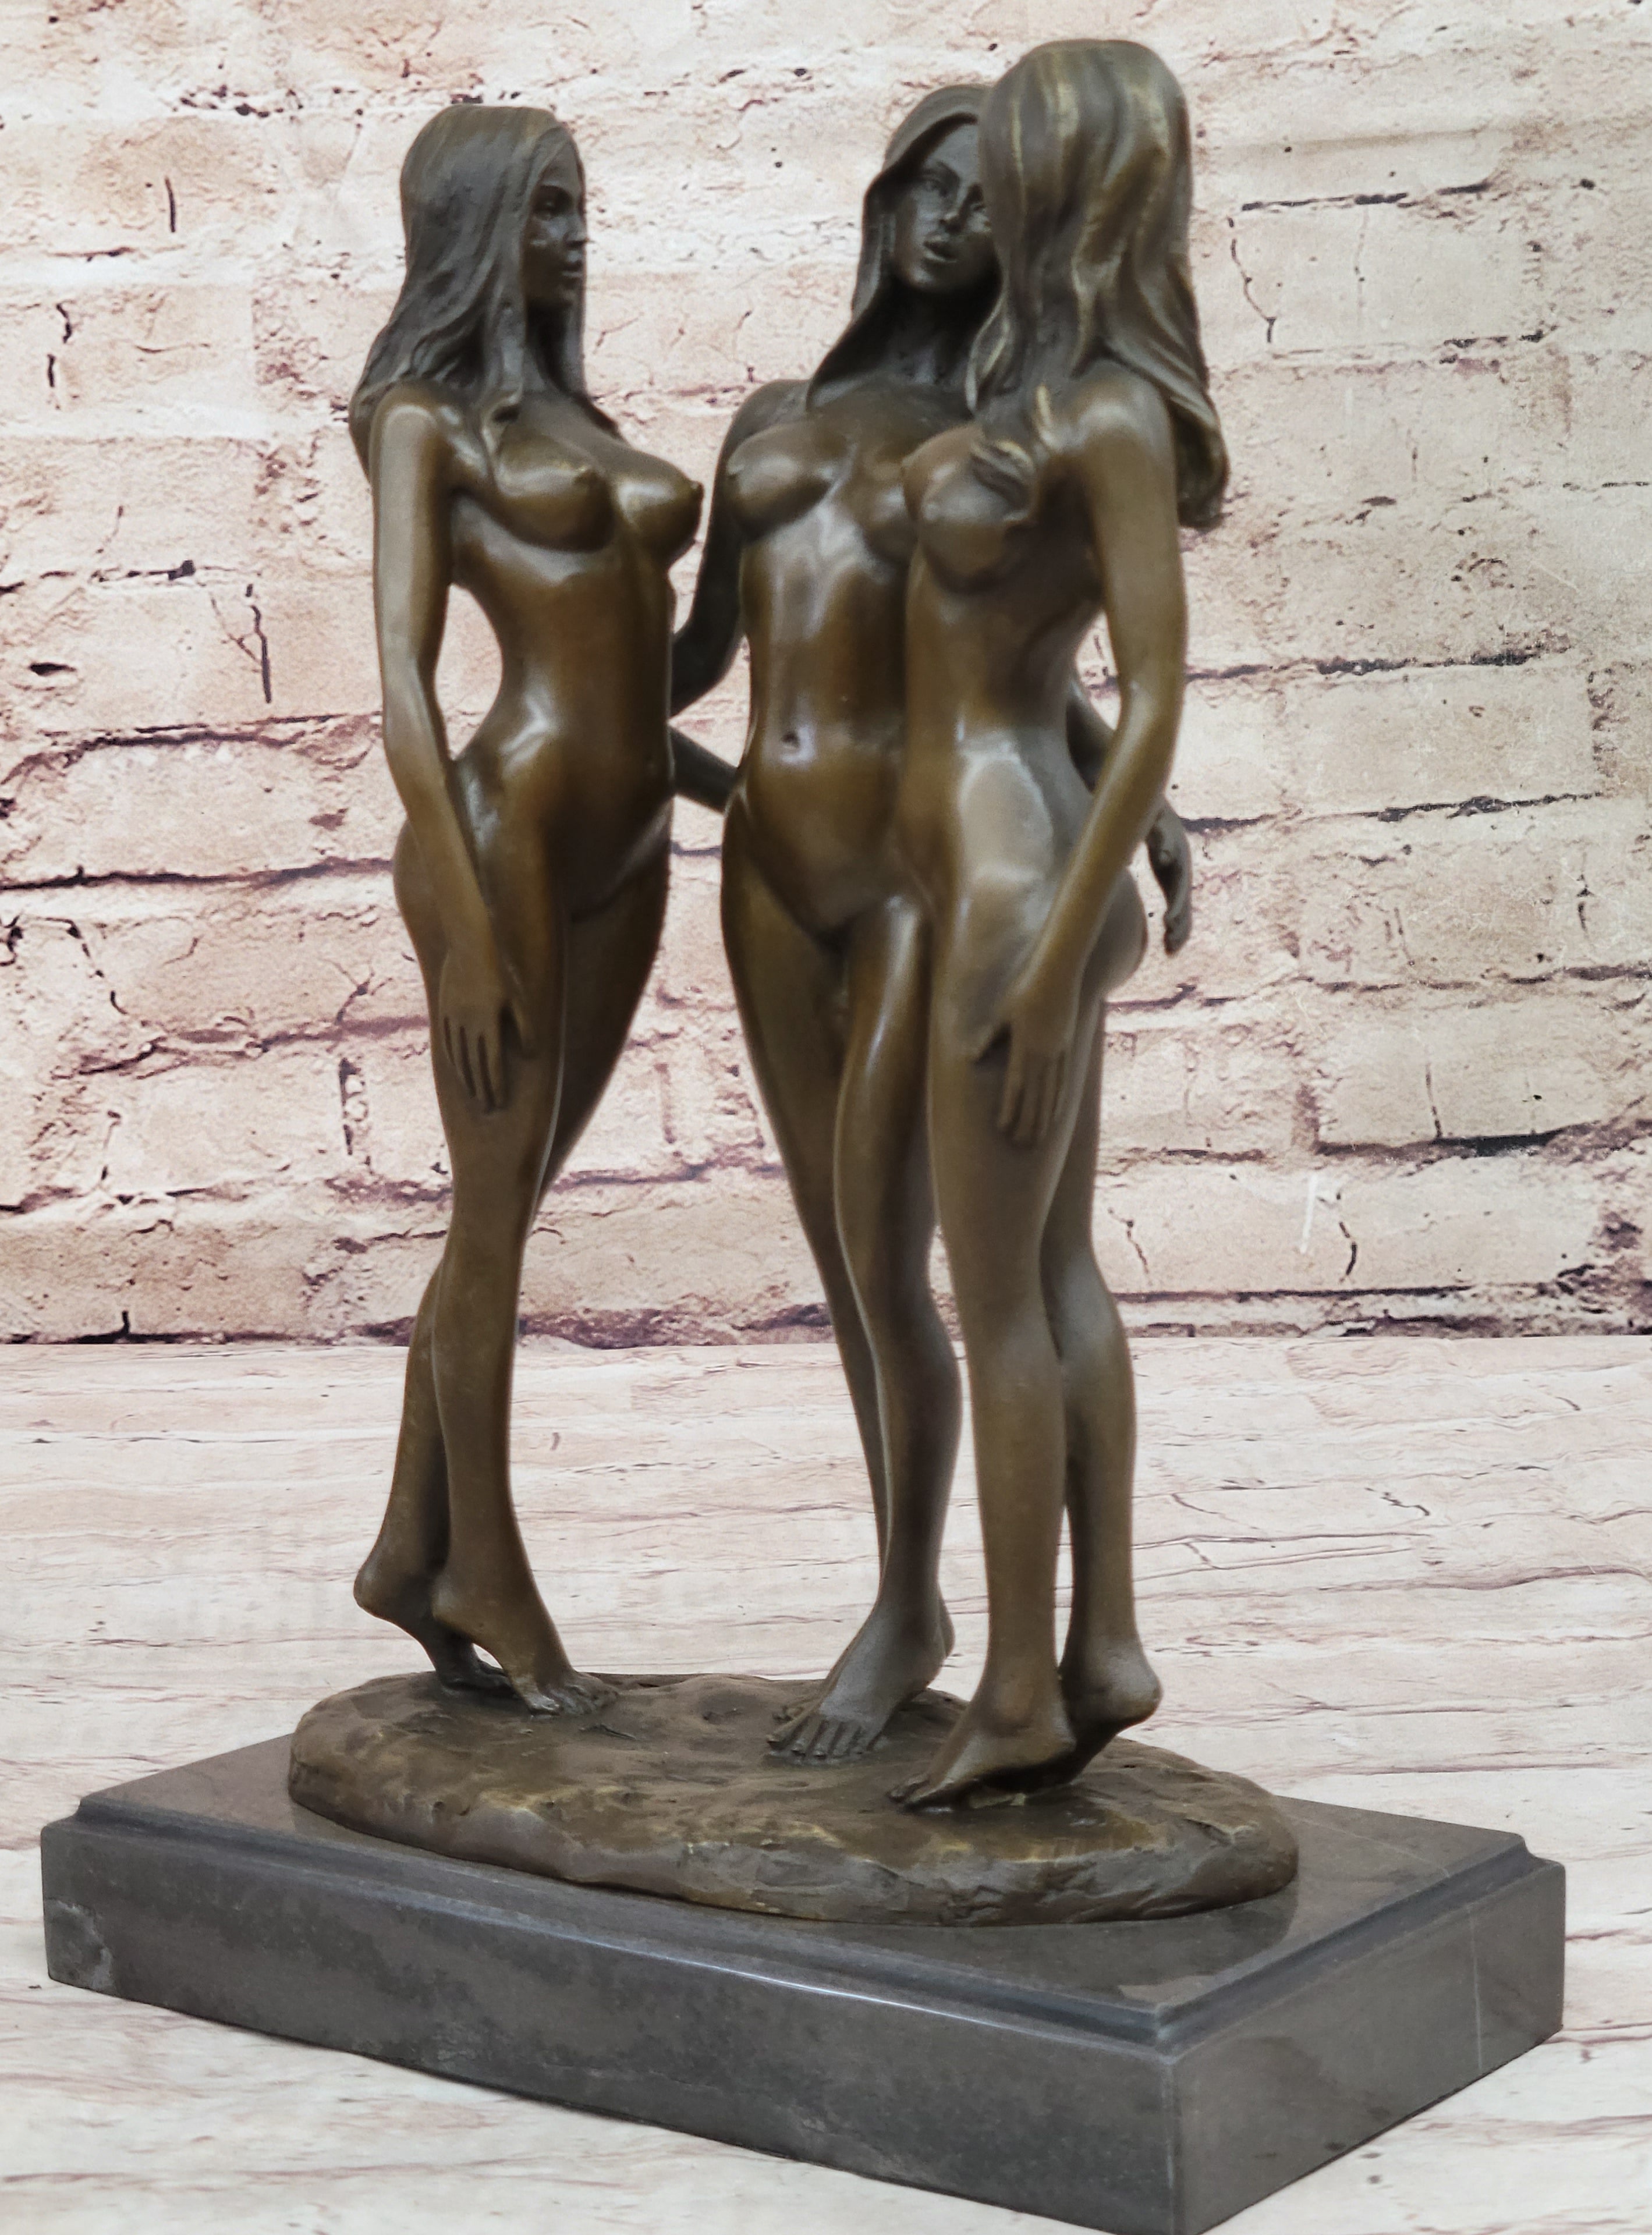 Three nude bronze Naked Girl statuettes statues Figurines by Mavchi  Figurine